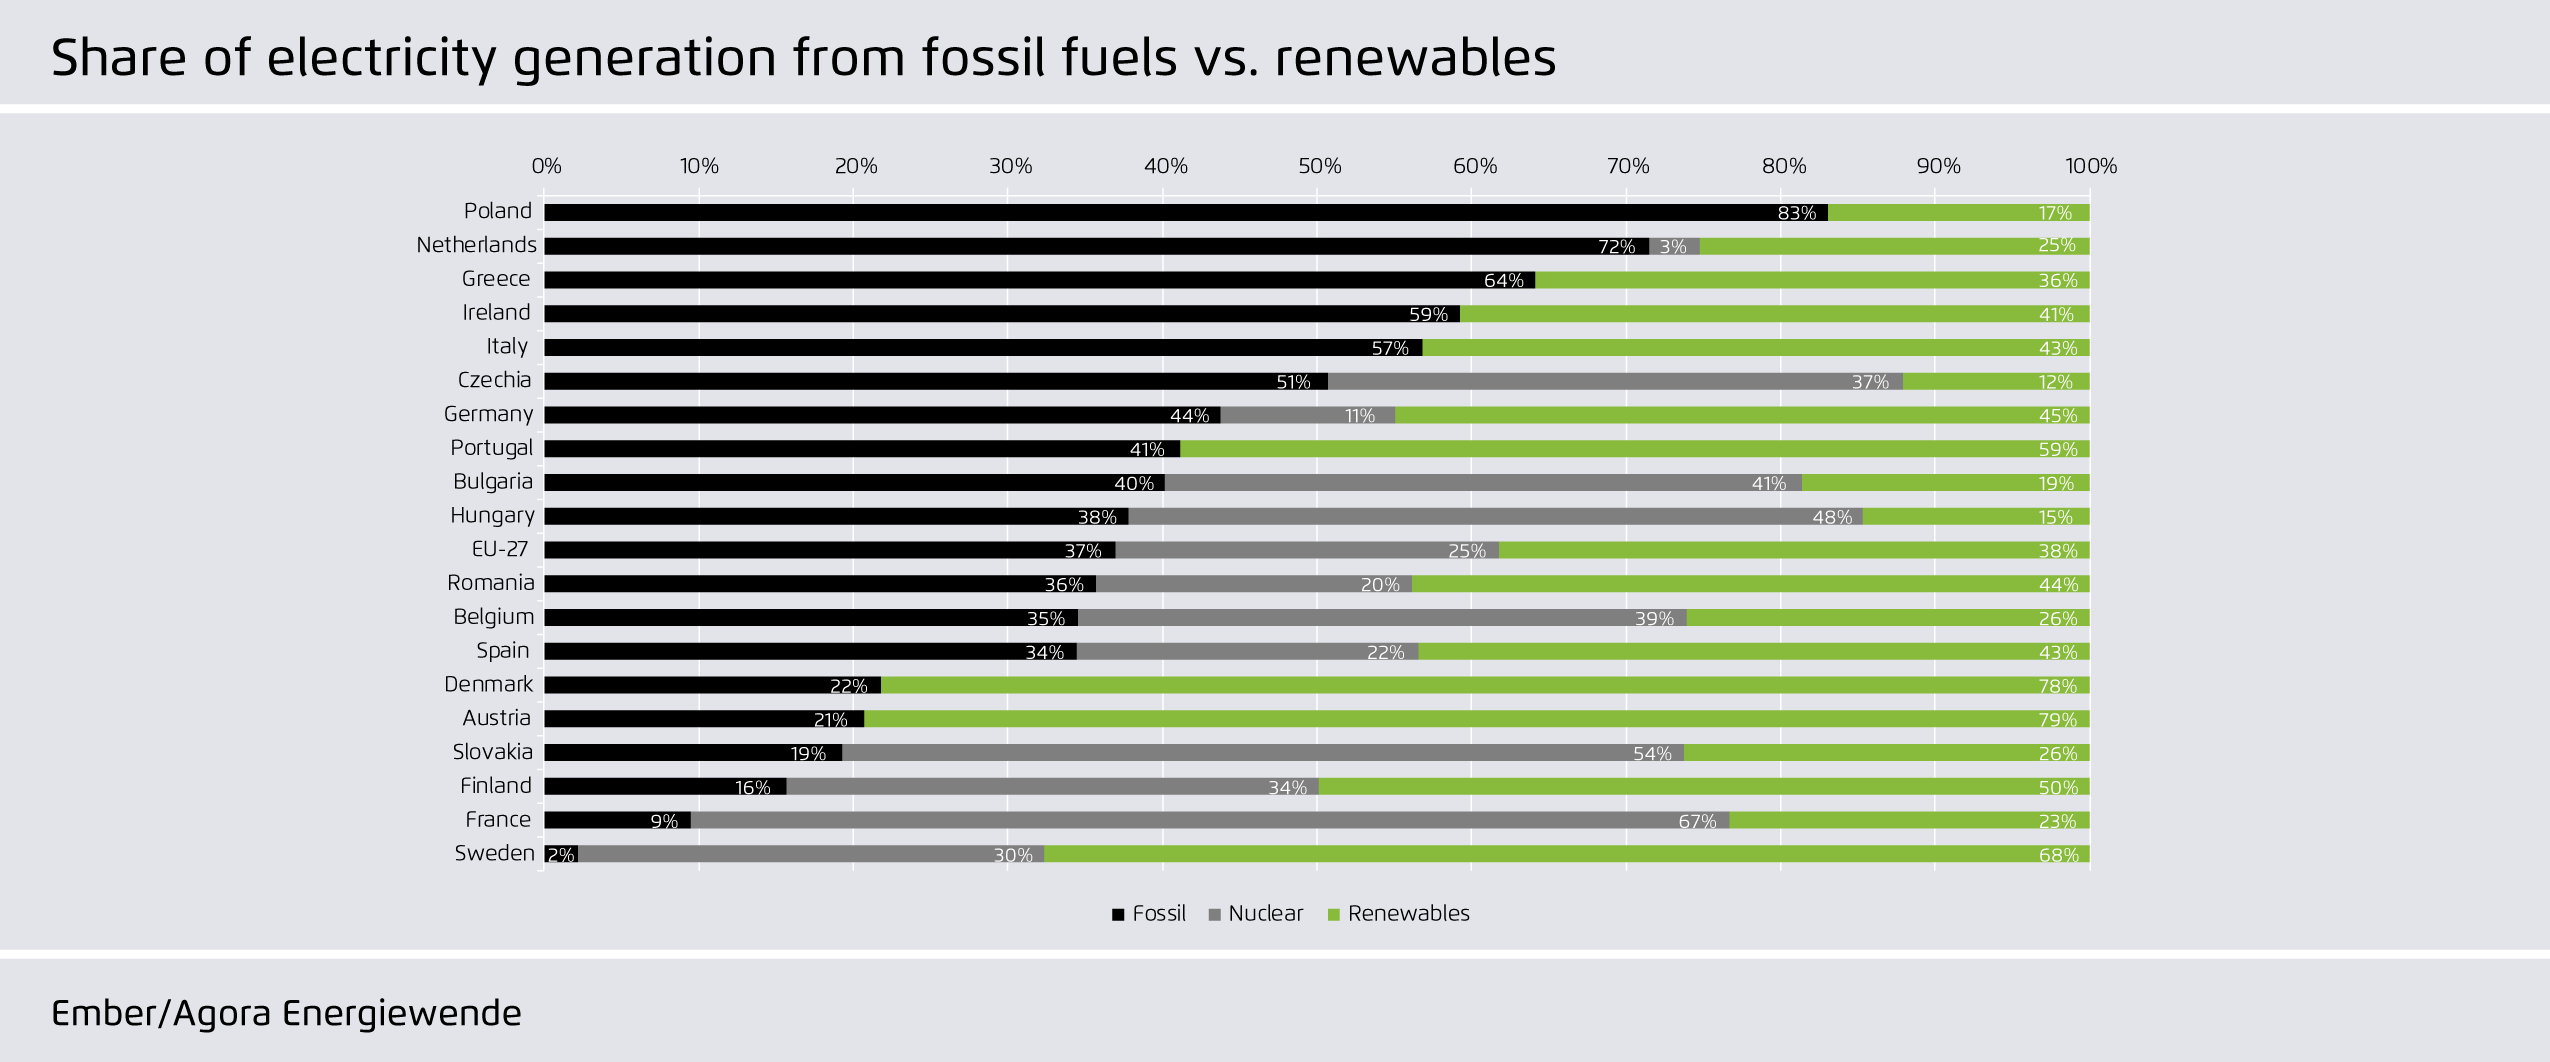 Preview for Share of electricity generation from fossil fuels vs. renewables